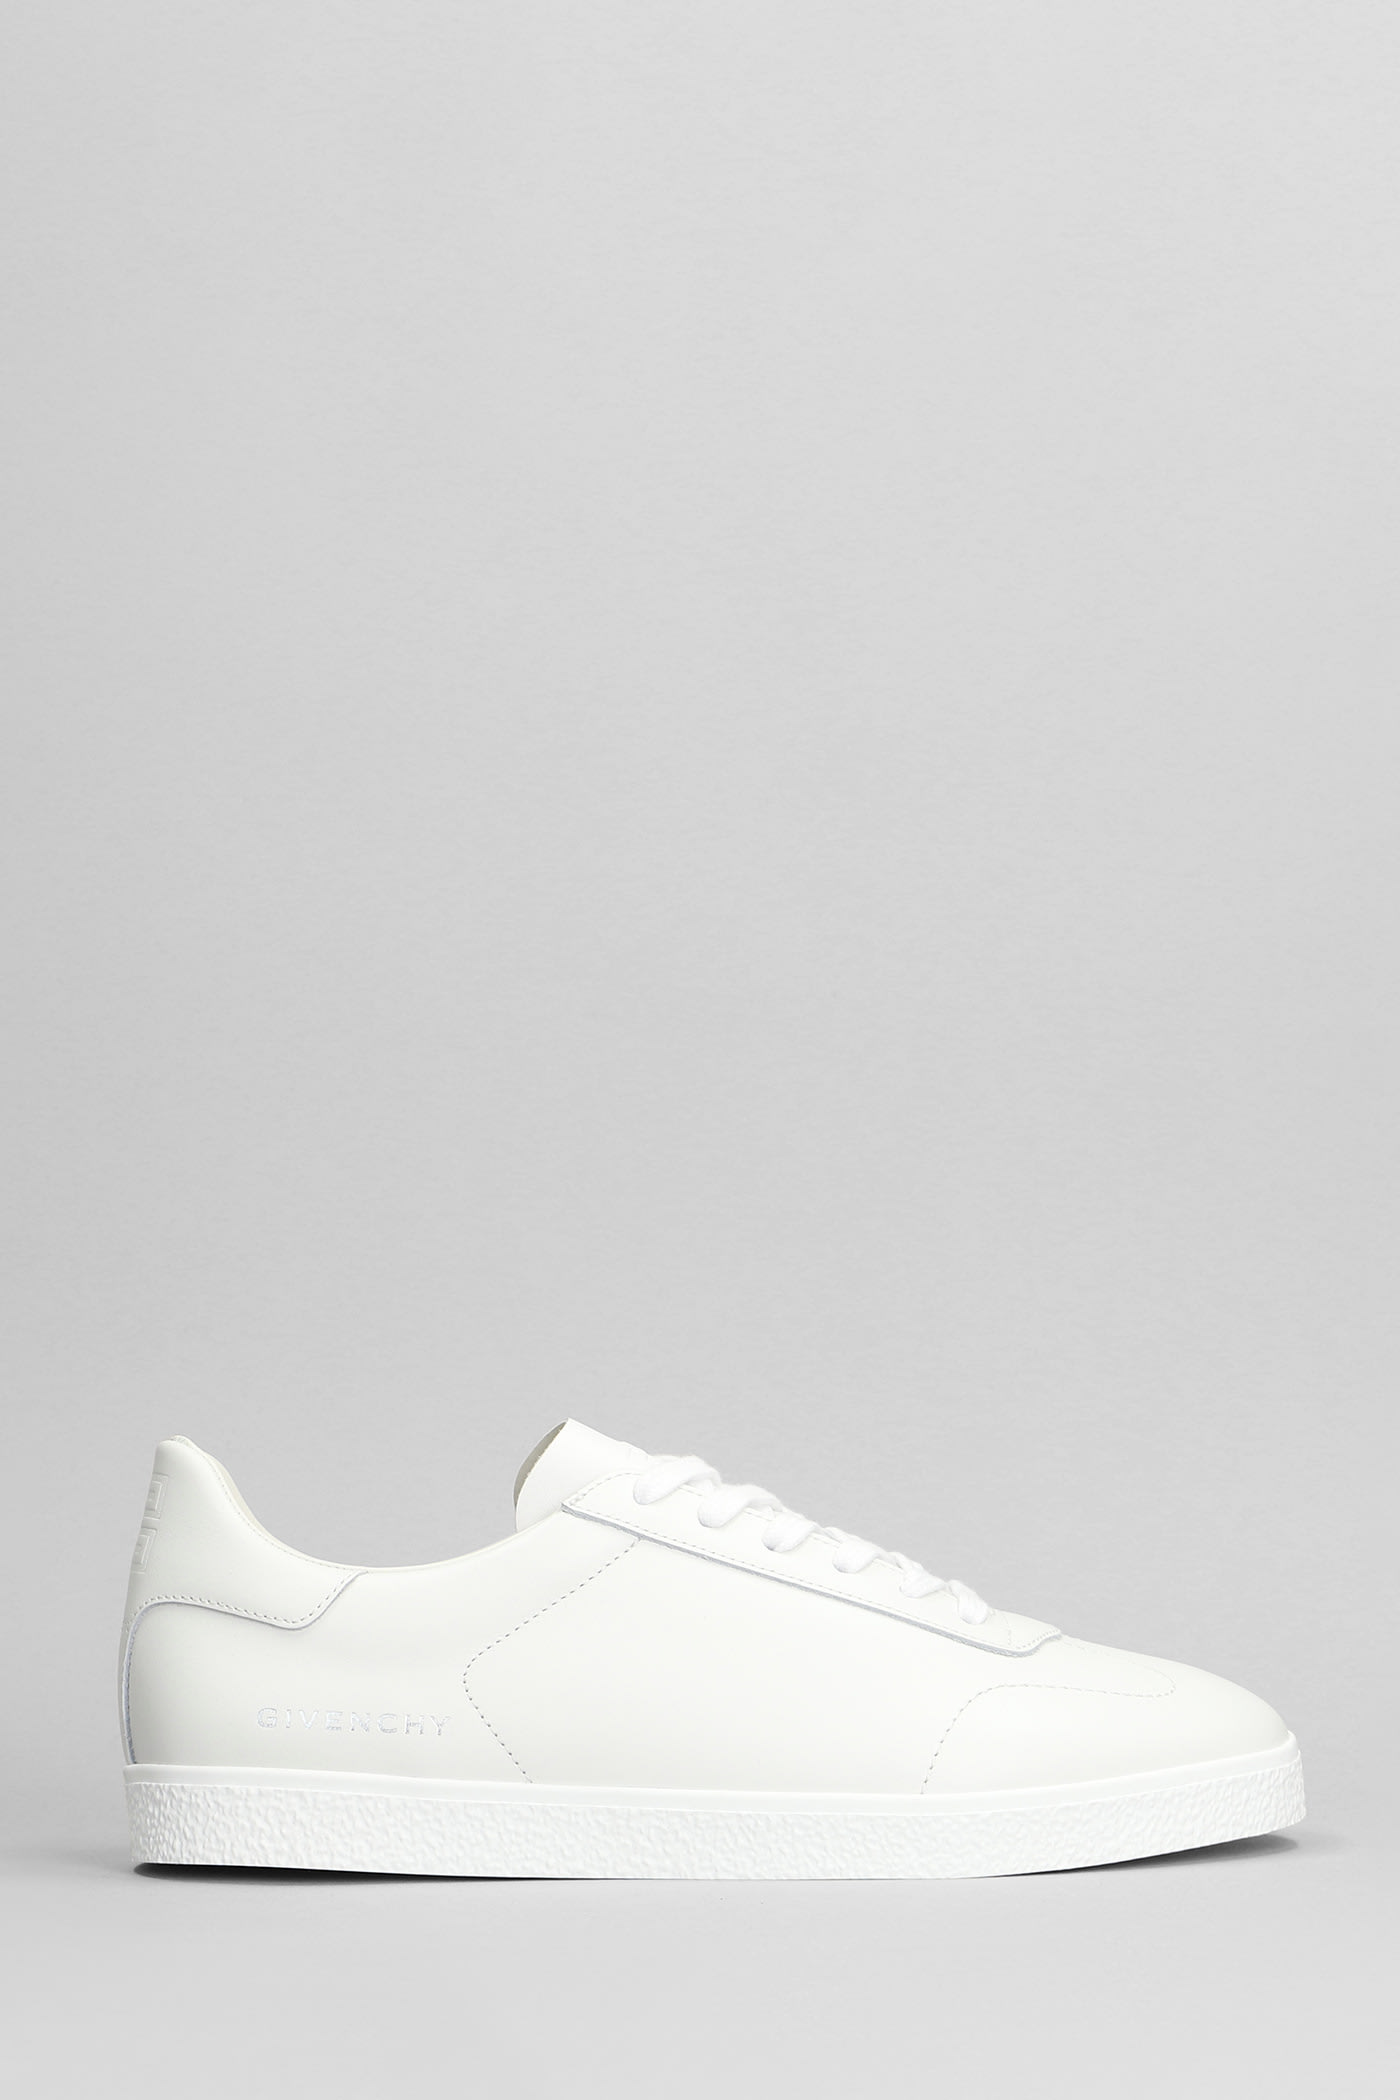 Givenchy Town Sneakers In White Leather